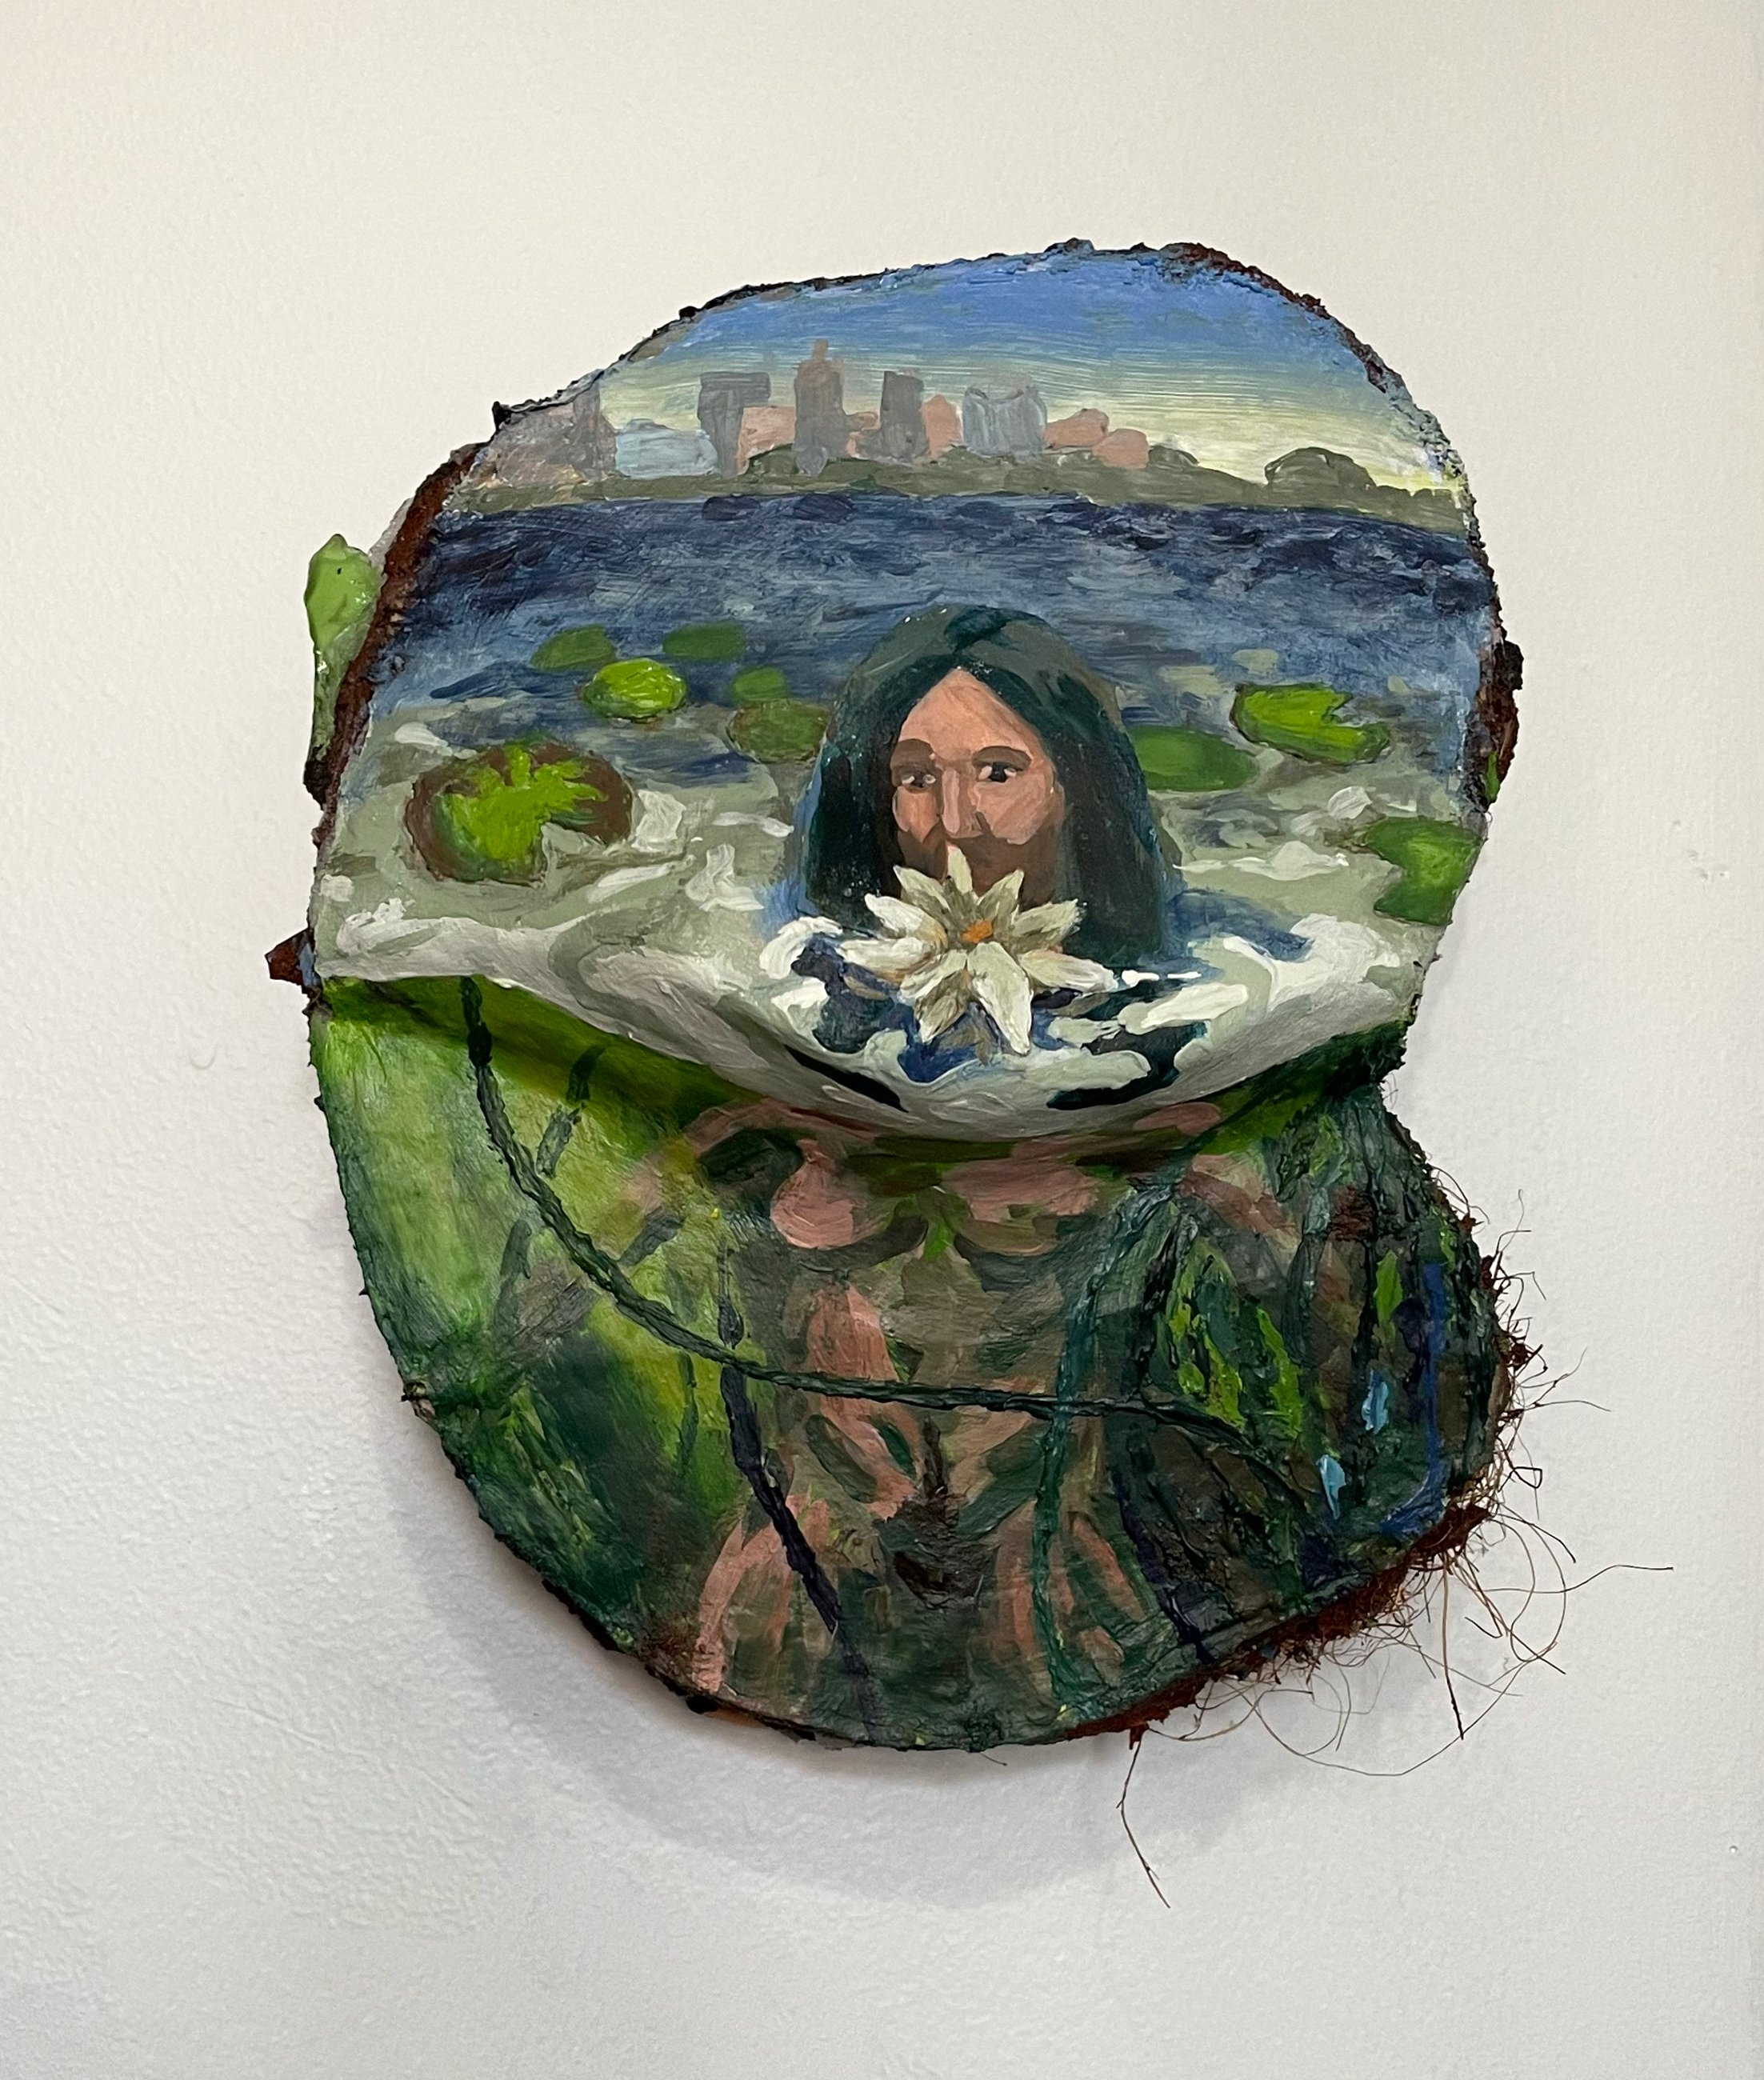  “East River Dreams”, 9"h x 8"w x 3"d,  Acrylic on cardboard, insulation foam, pottery shards, candy wrappers, and sea glass, 2021 